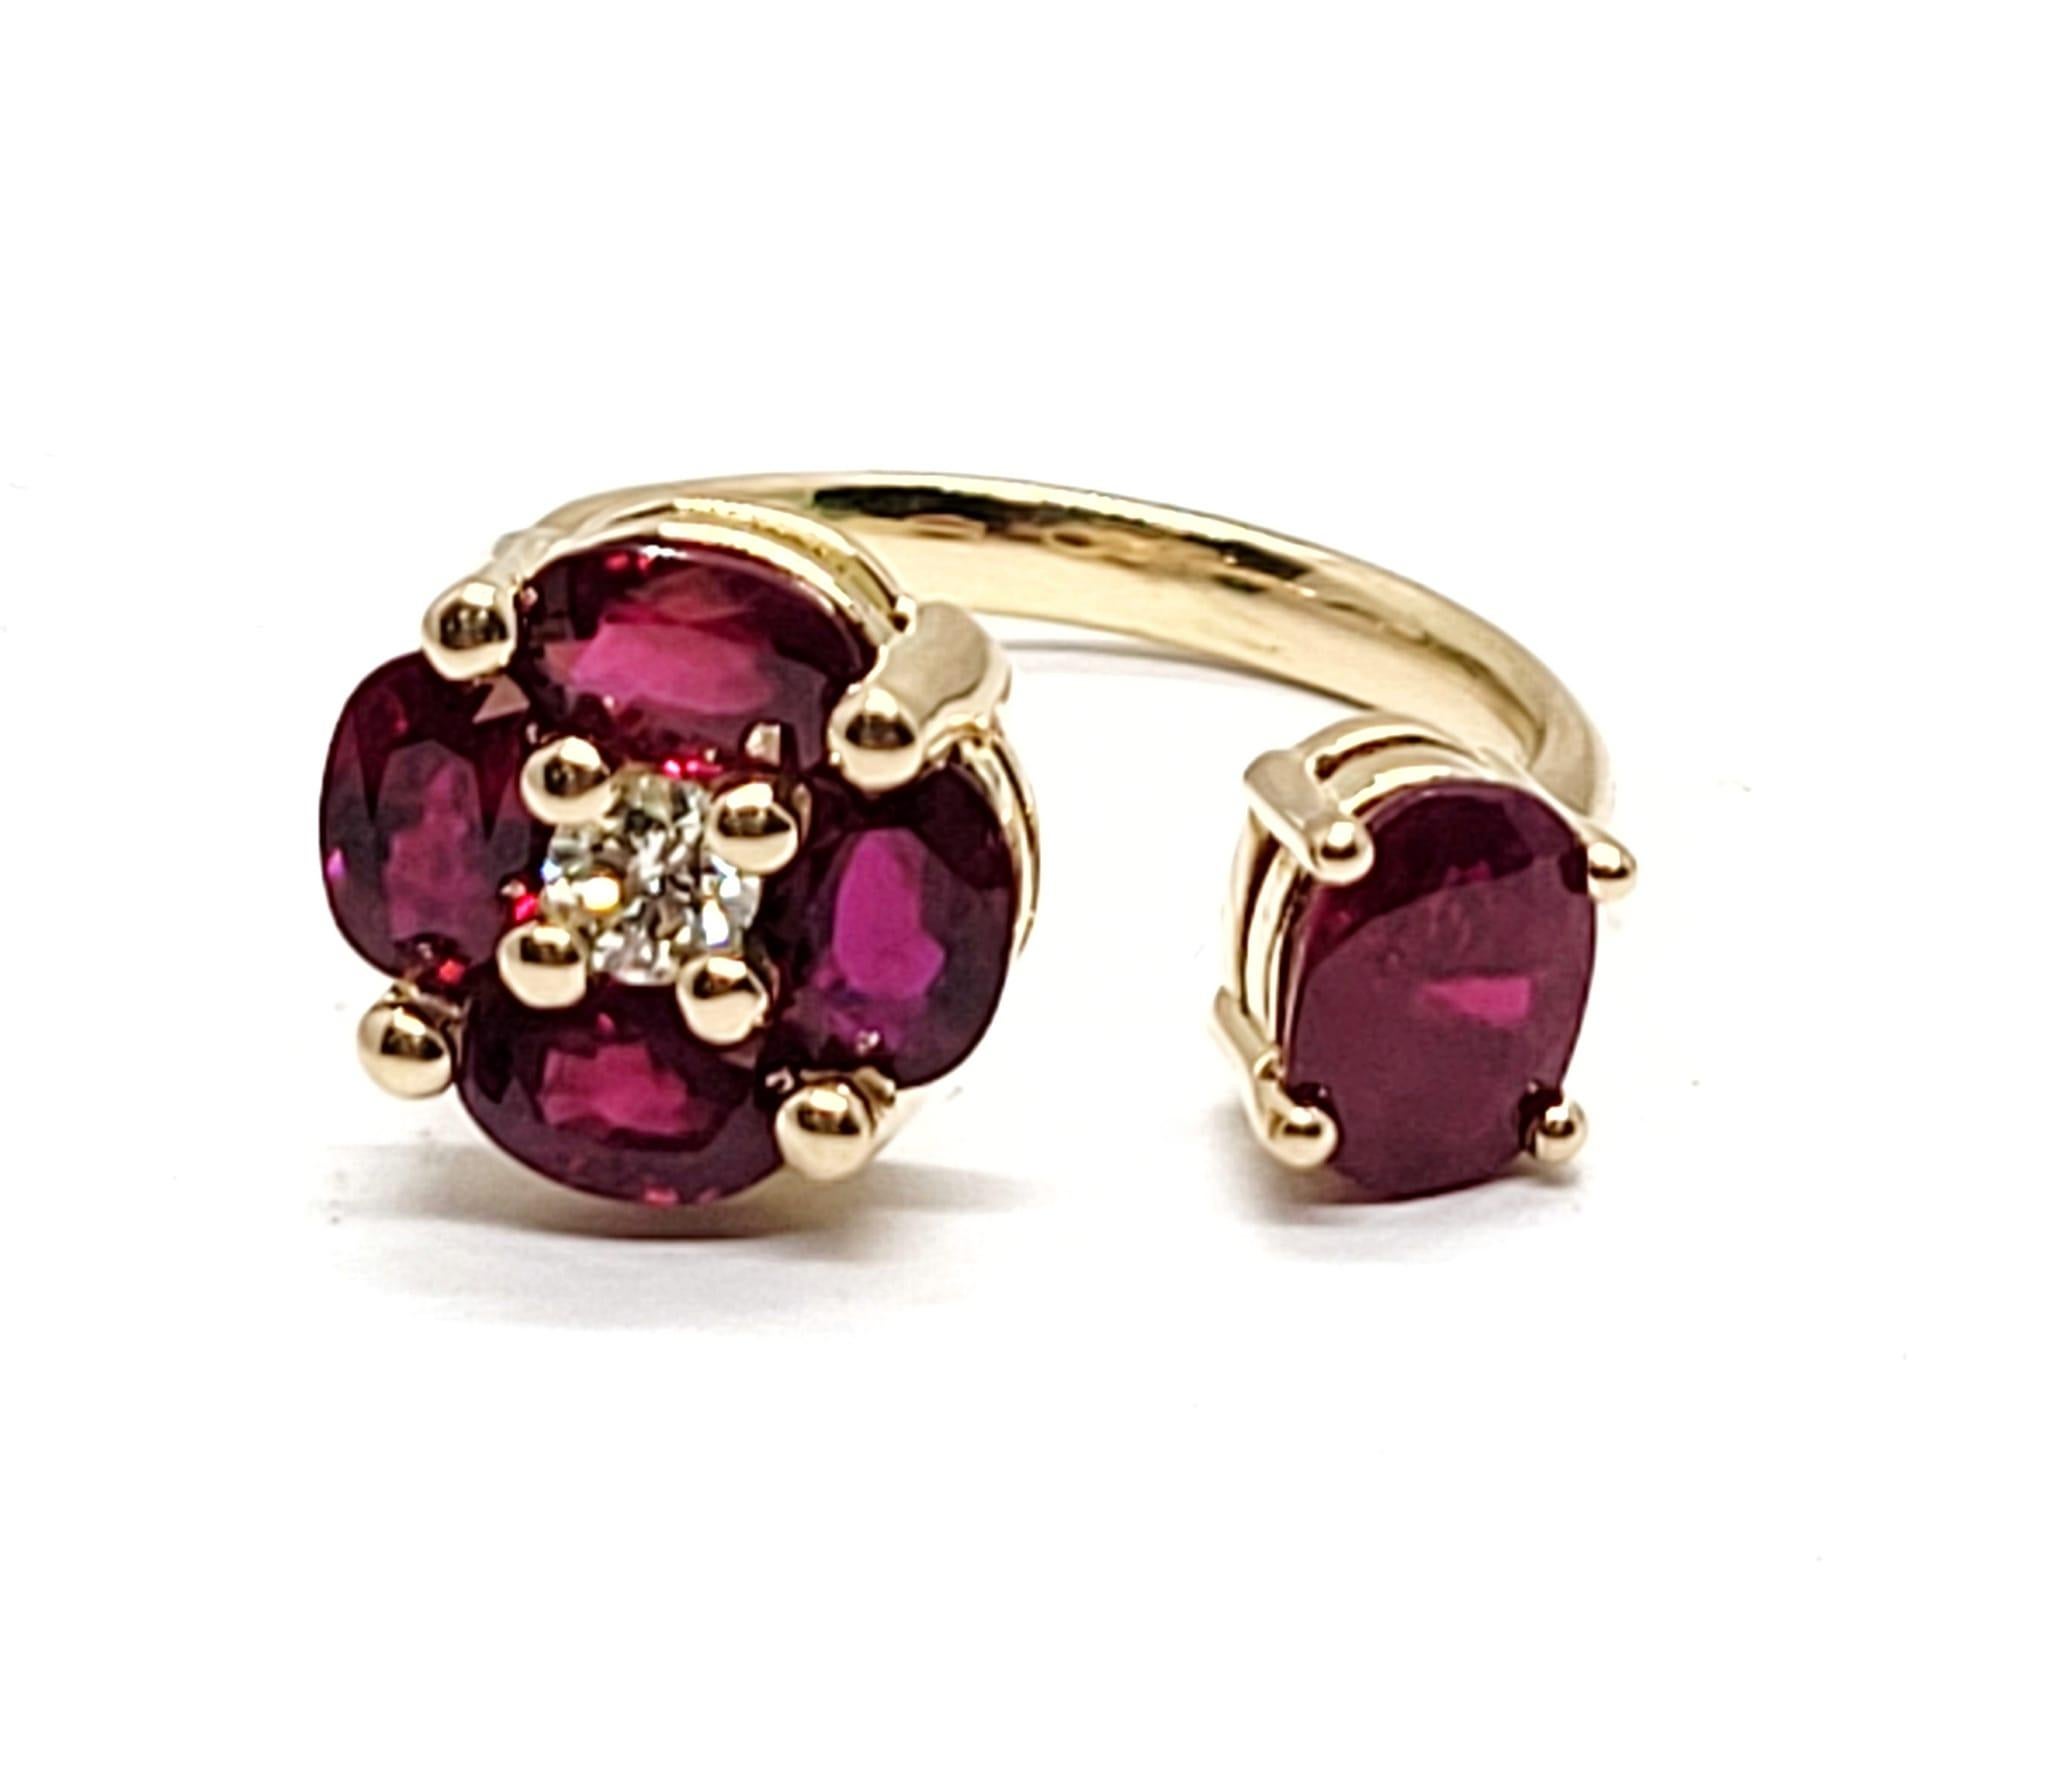 Oval Cut Andreoli 3.51 Carat Ruby Diamond 18 Karat Yellow Gold Ring For Sale